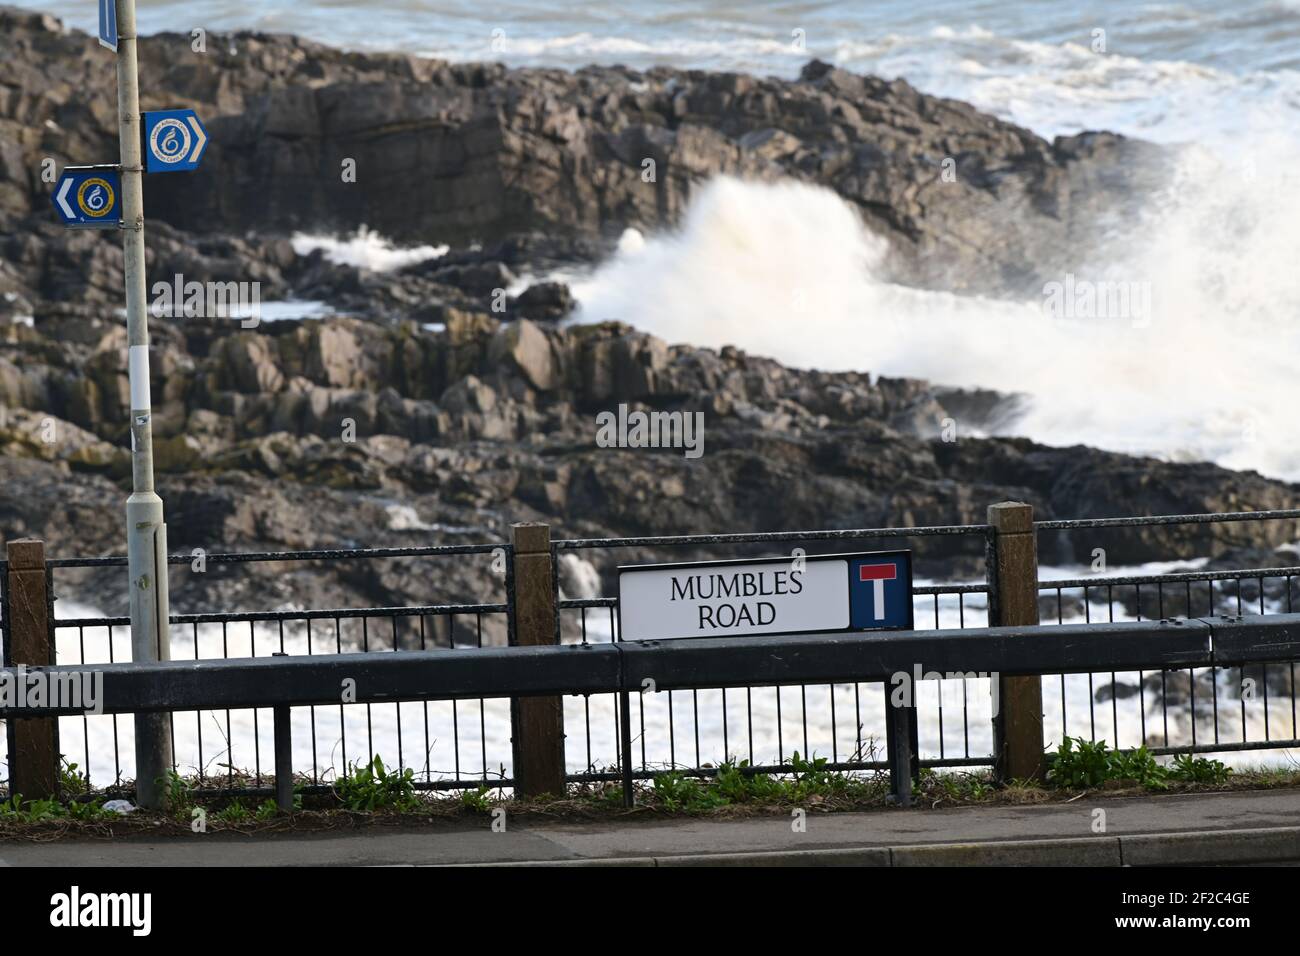 Strong Winds and Storm Surf batter the coastline at Mumbles Head. Mumbles Road sign on verge. Stock Photo